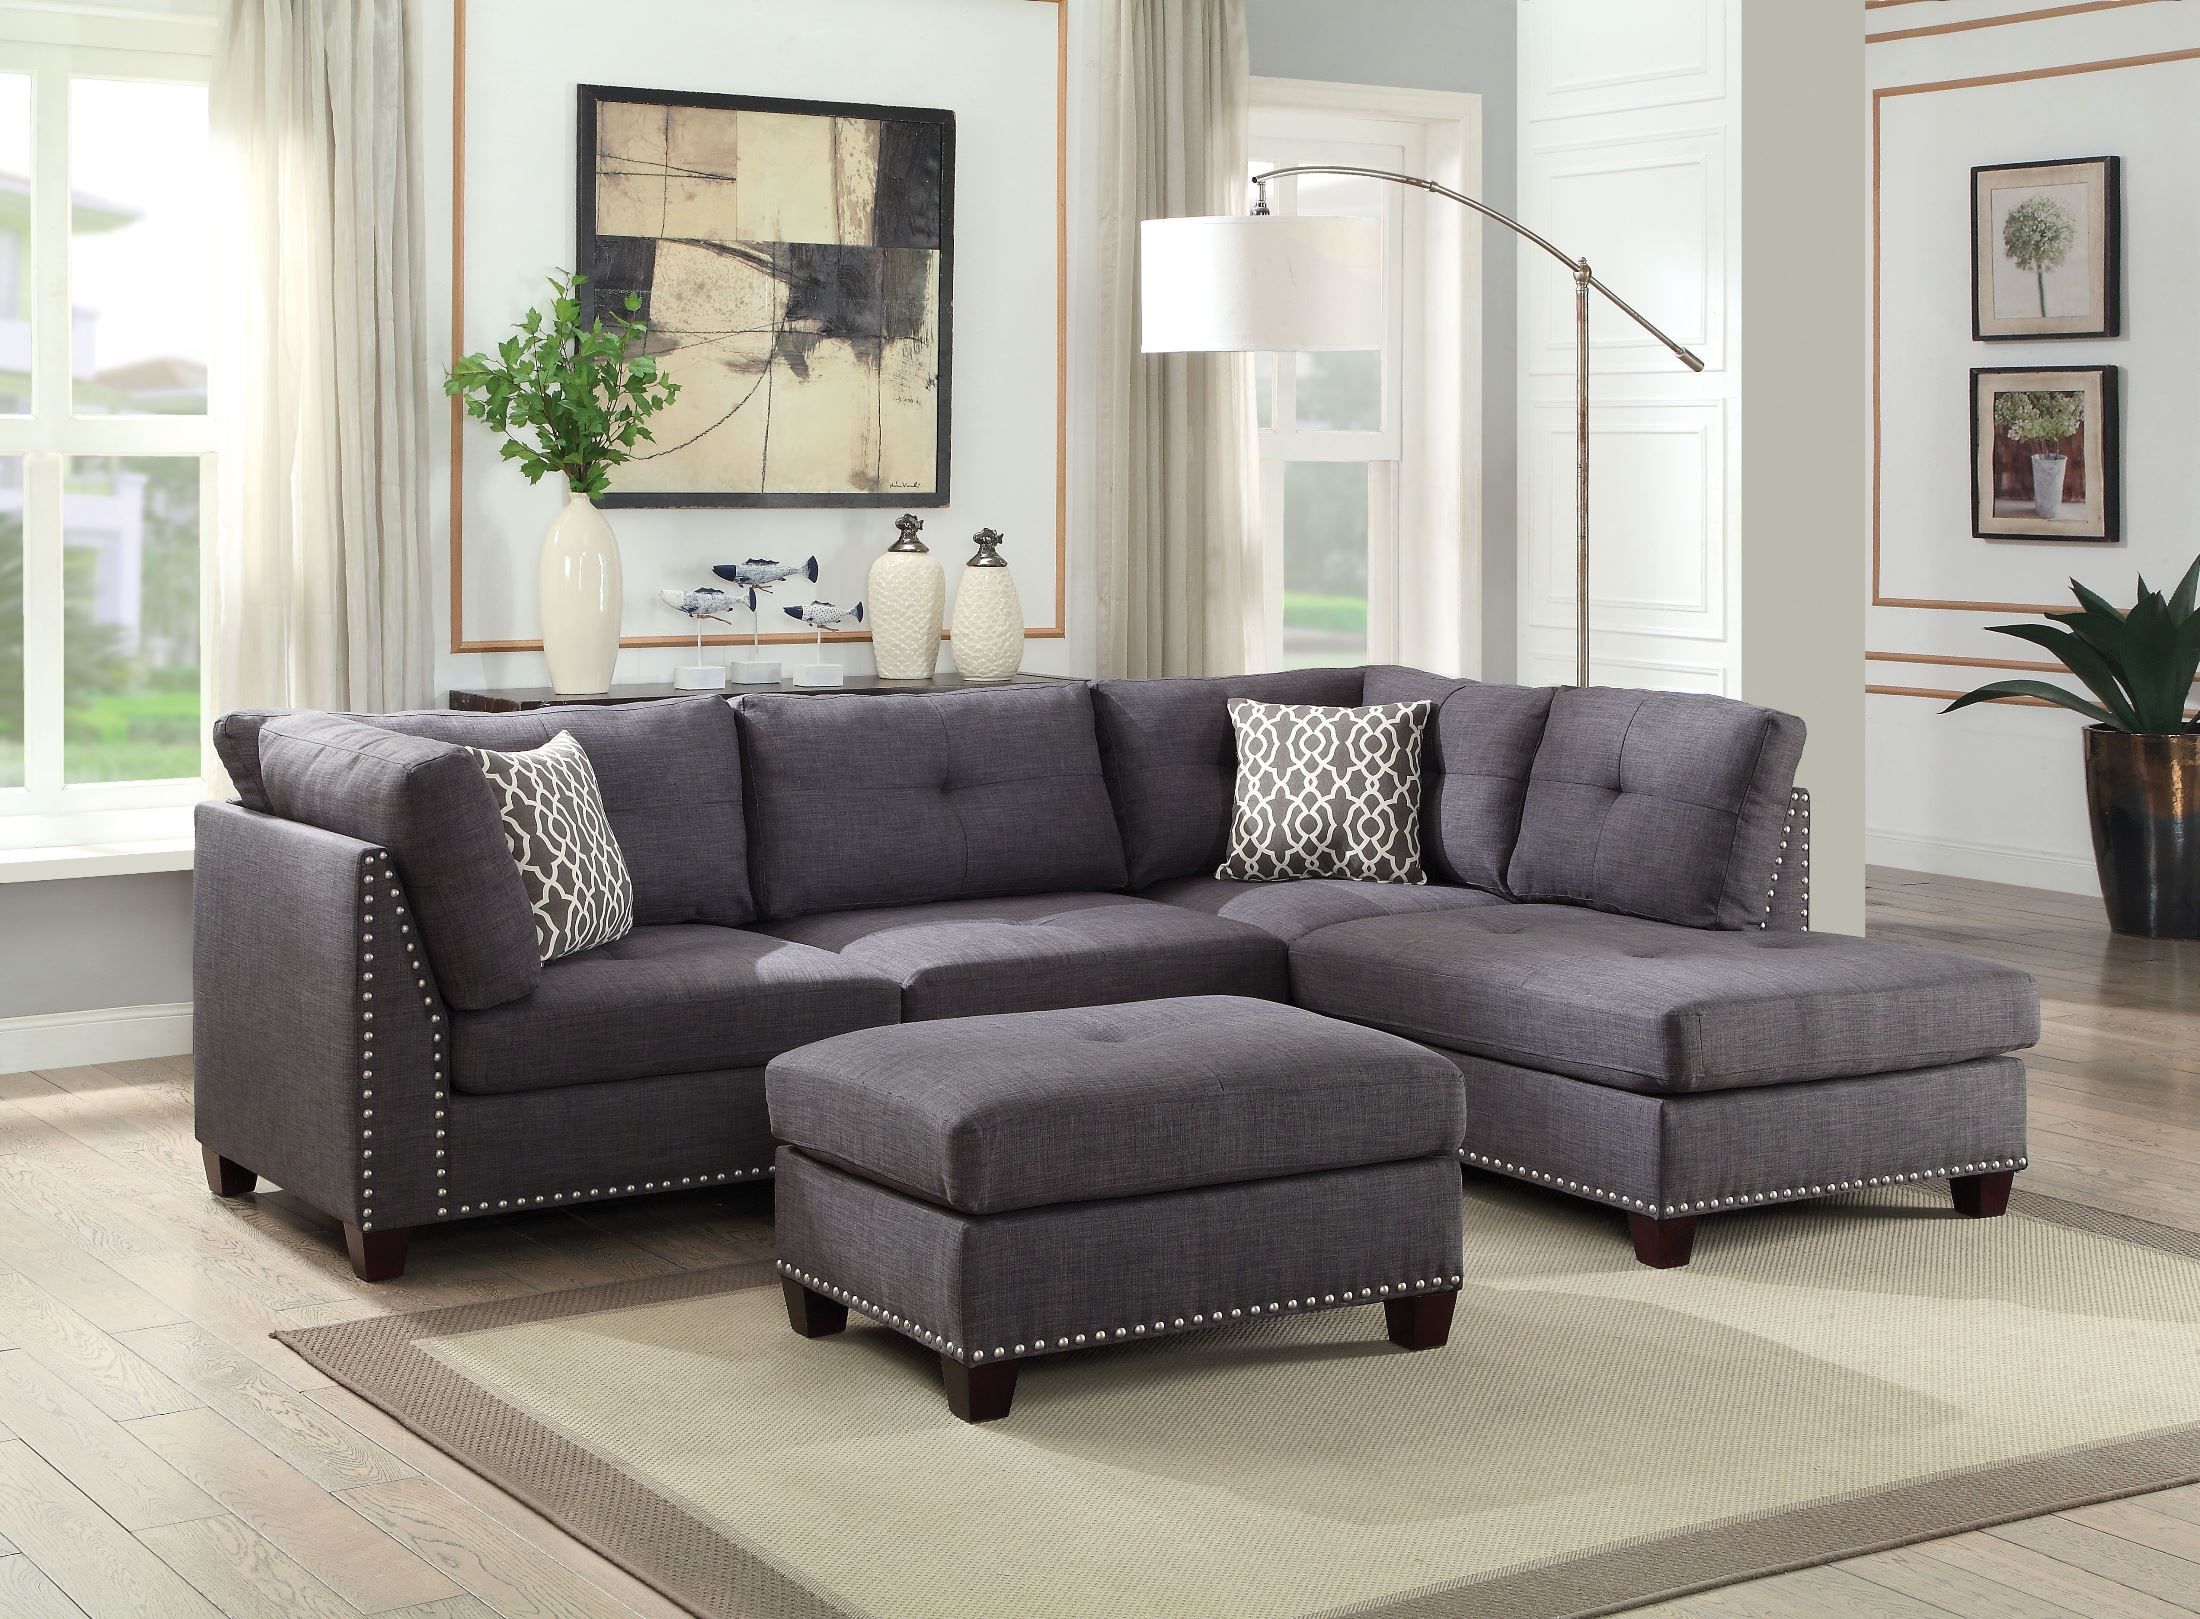 Acme Laurissa Light Charcoal Linen Sectional Sofa With Ottoman Regarding Light Charcoal Linen Sofas (Gallery 1 of 20)